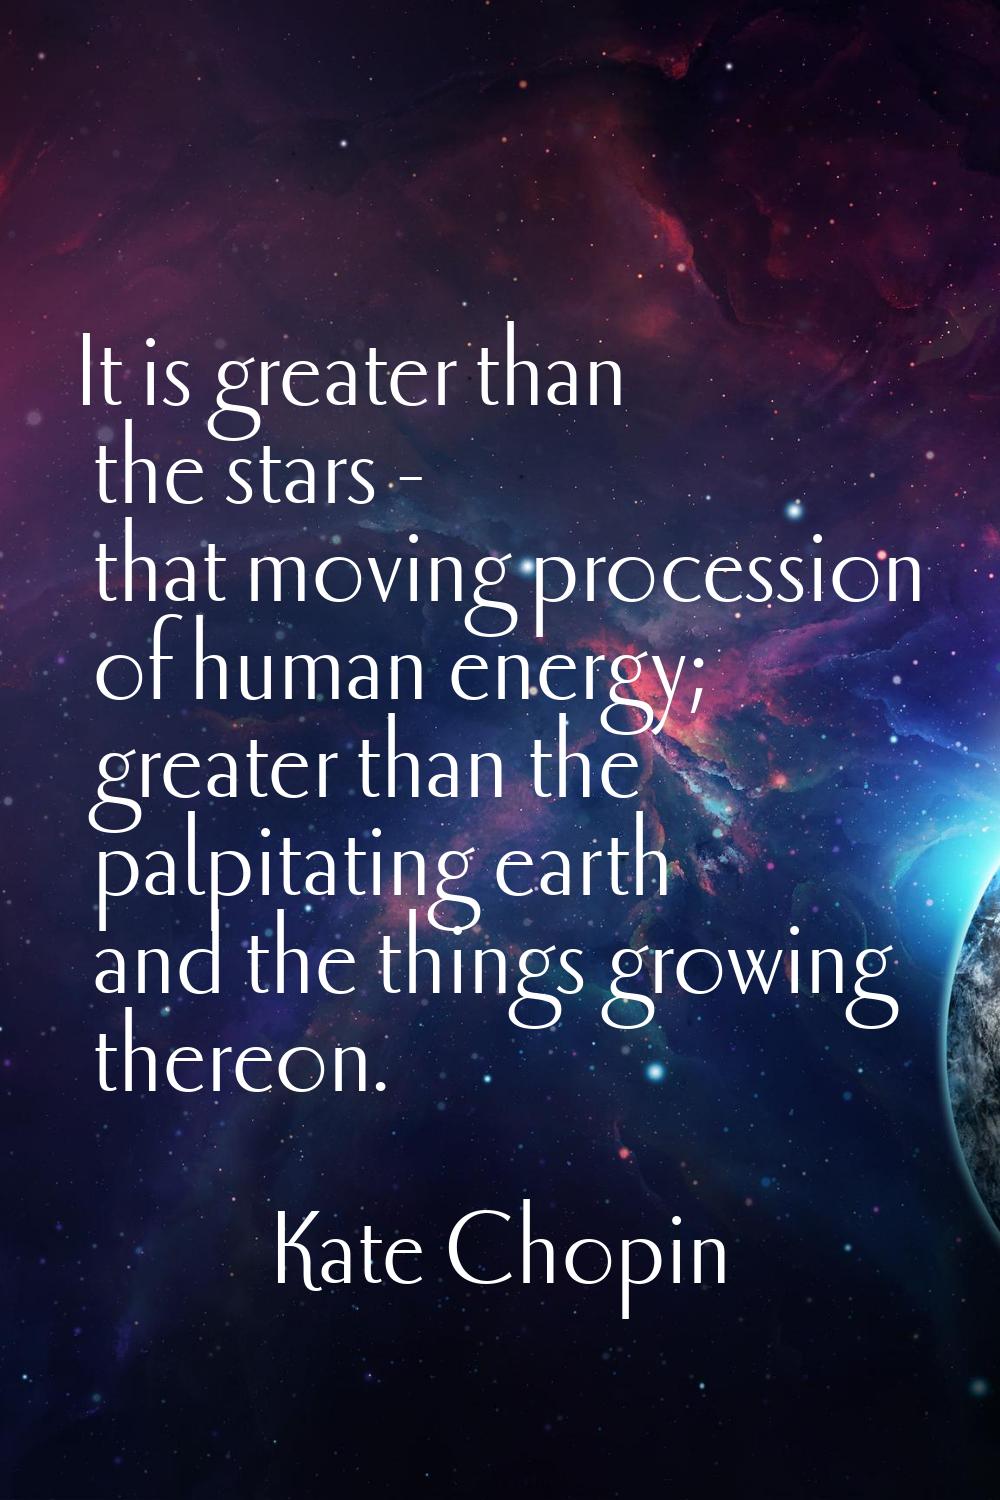 It is greater than the stars - that moving procession of human energy; greater than the palpitating